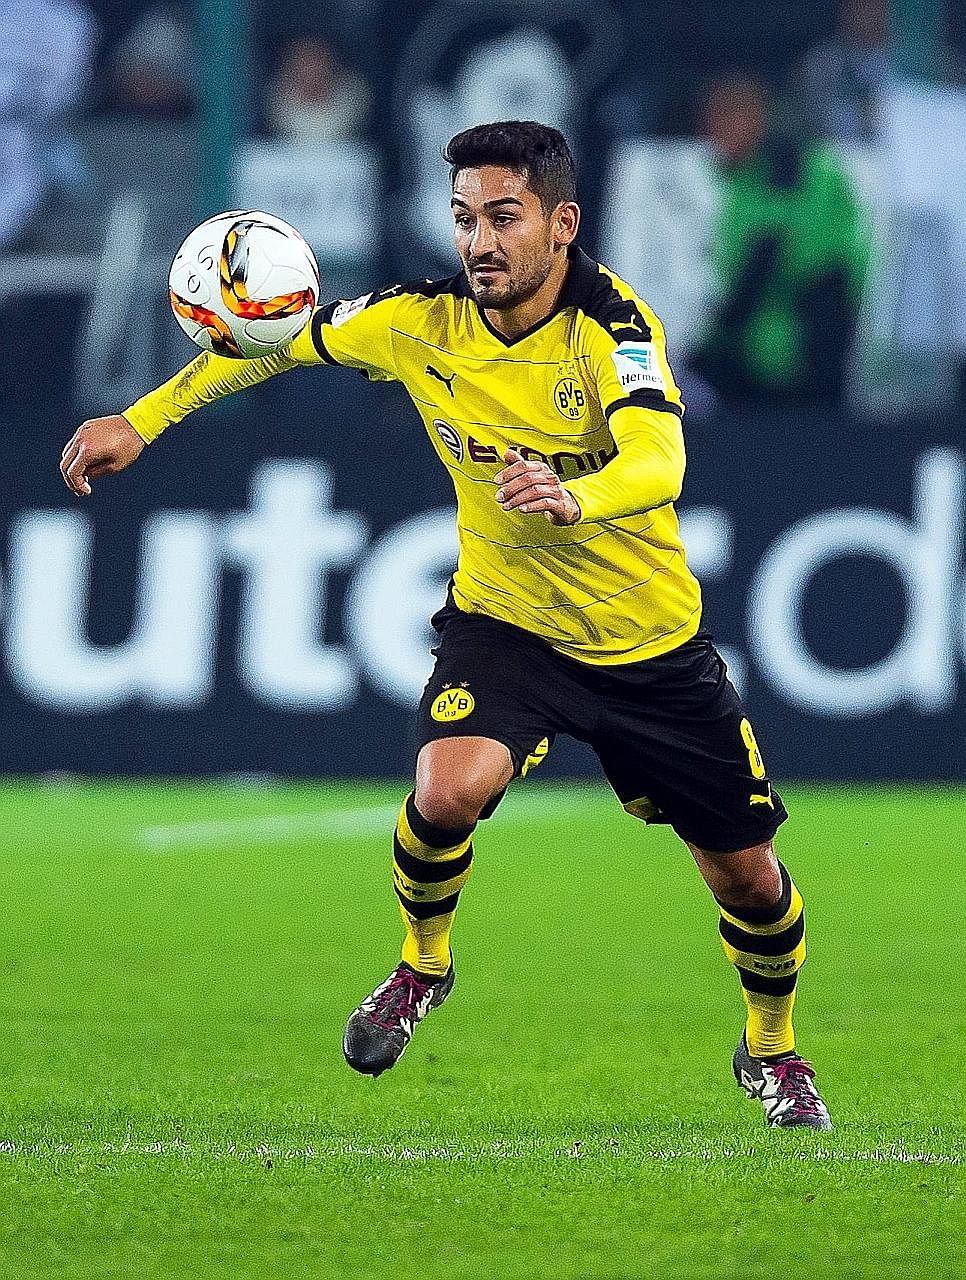 Ilkay Gundogan in action during a German Bundesliga match in January. The midfielder dislocated a knee cap in early May but Manchester City say he is recovering well from the injury.